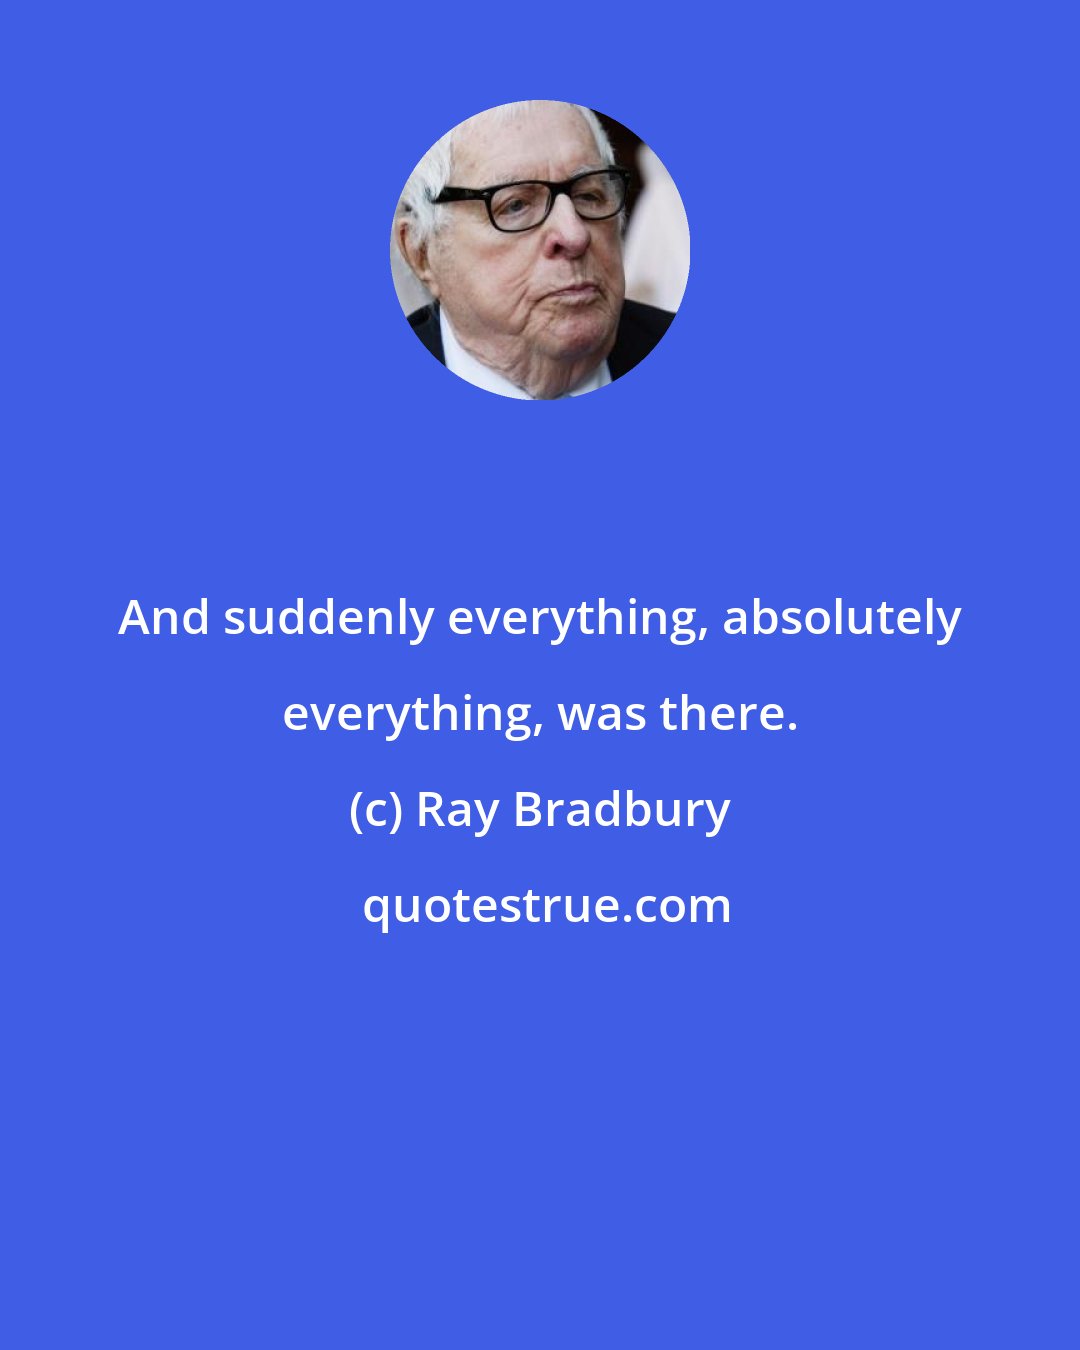 Ray Bradbury: And suddenly everything, absolutely everything, was there.